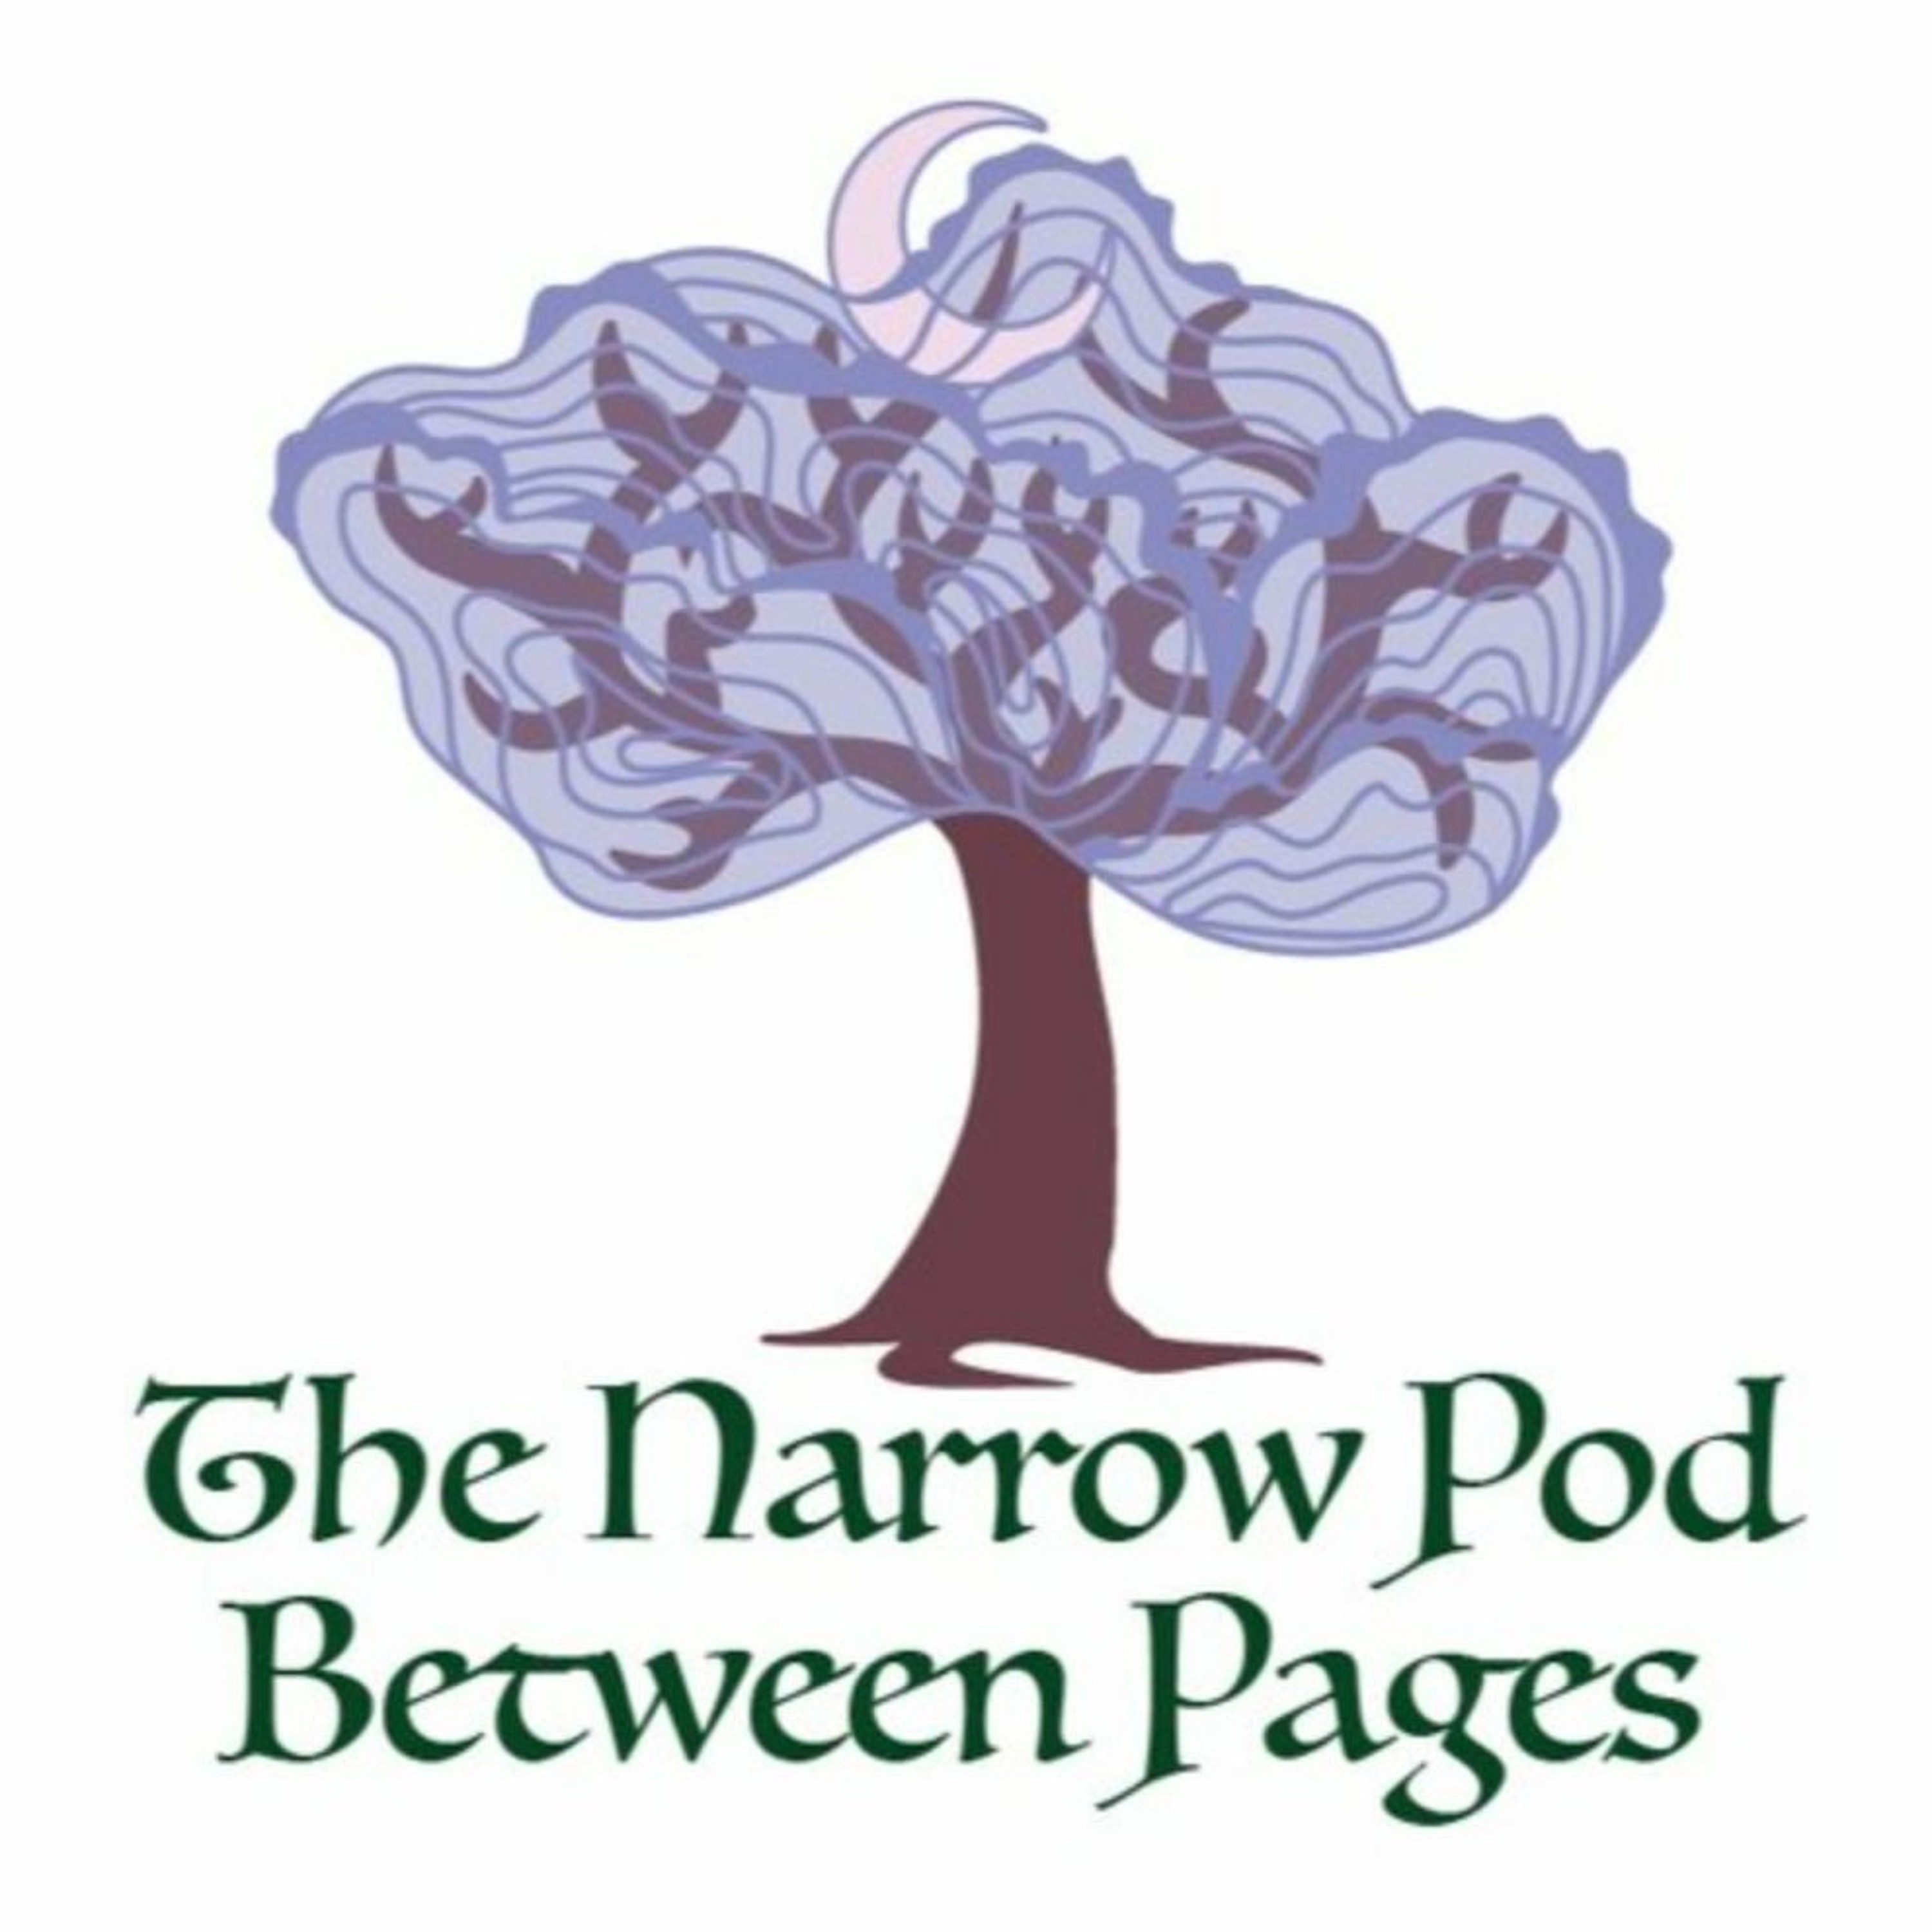 The Narrow Pod Between Pages - Page 178-179: A Single Scissor?